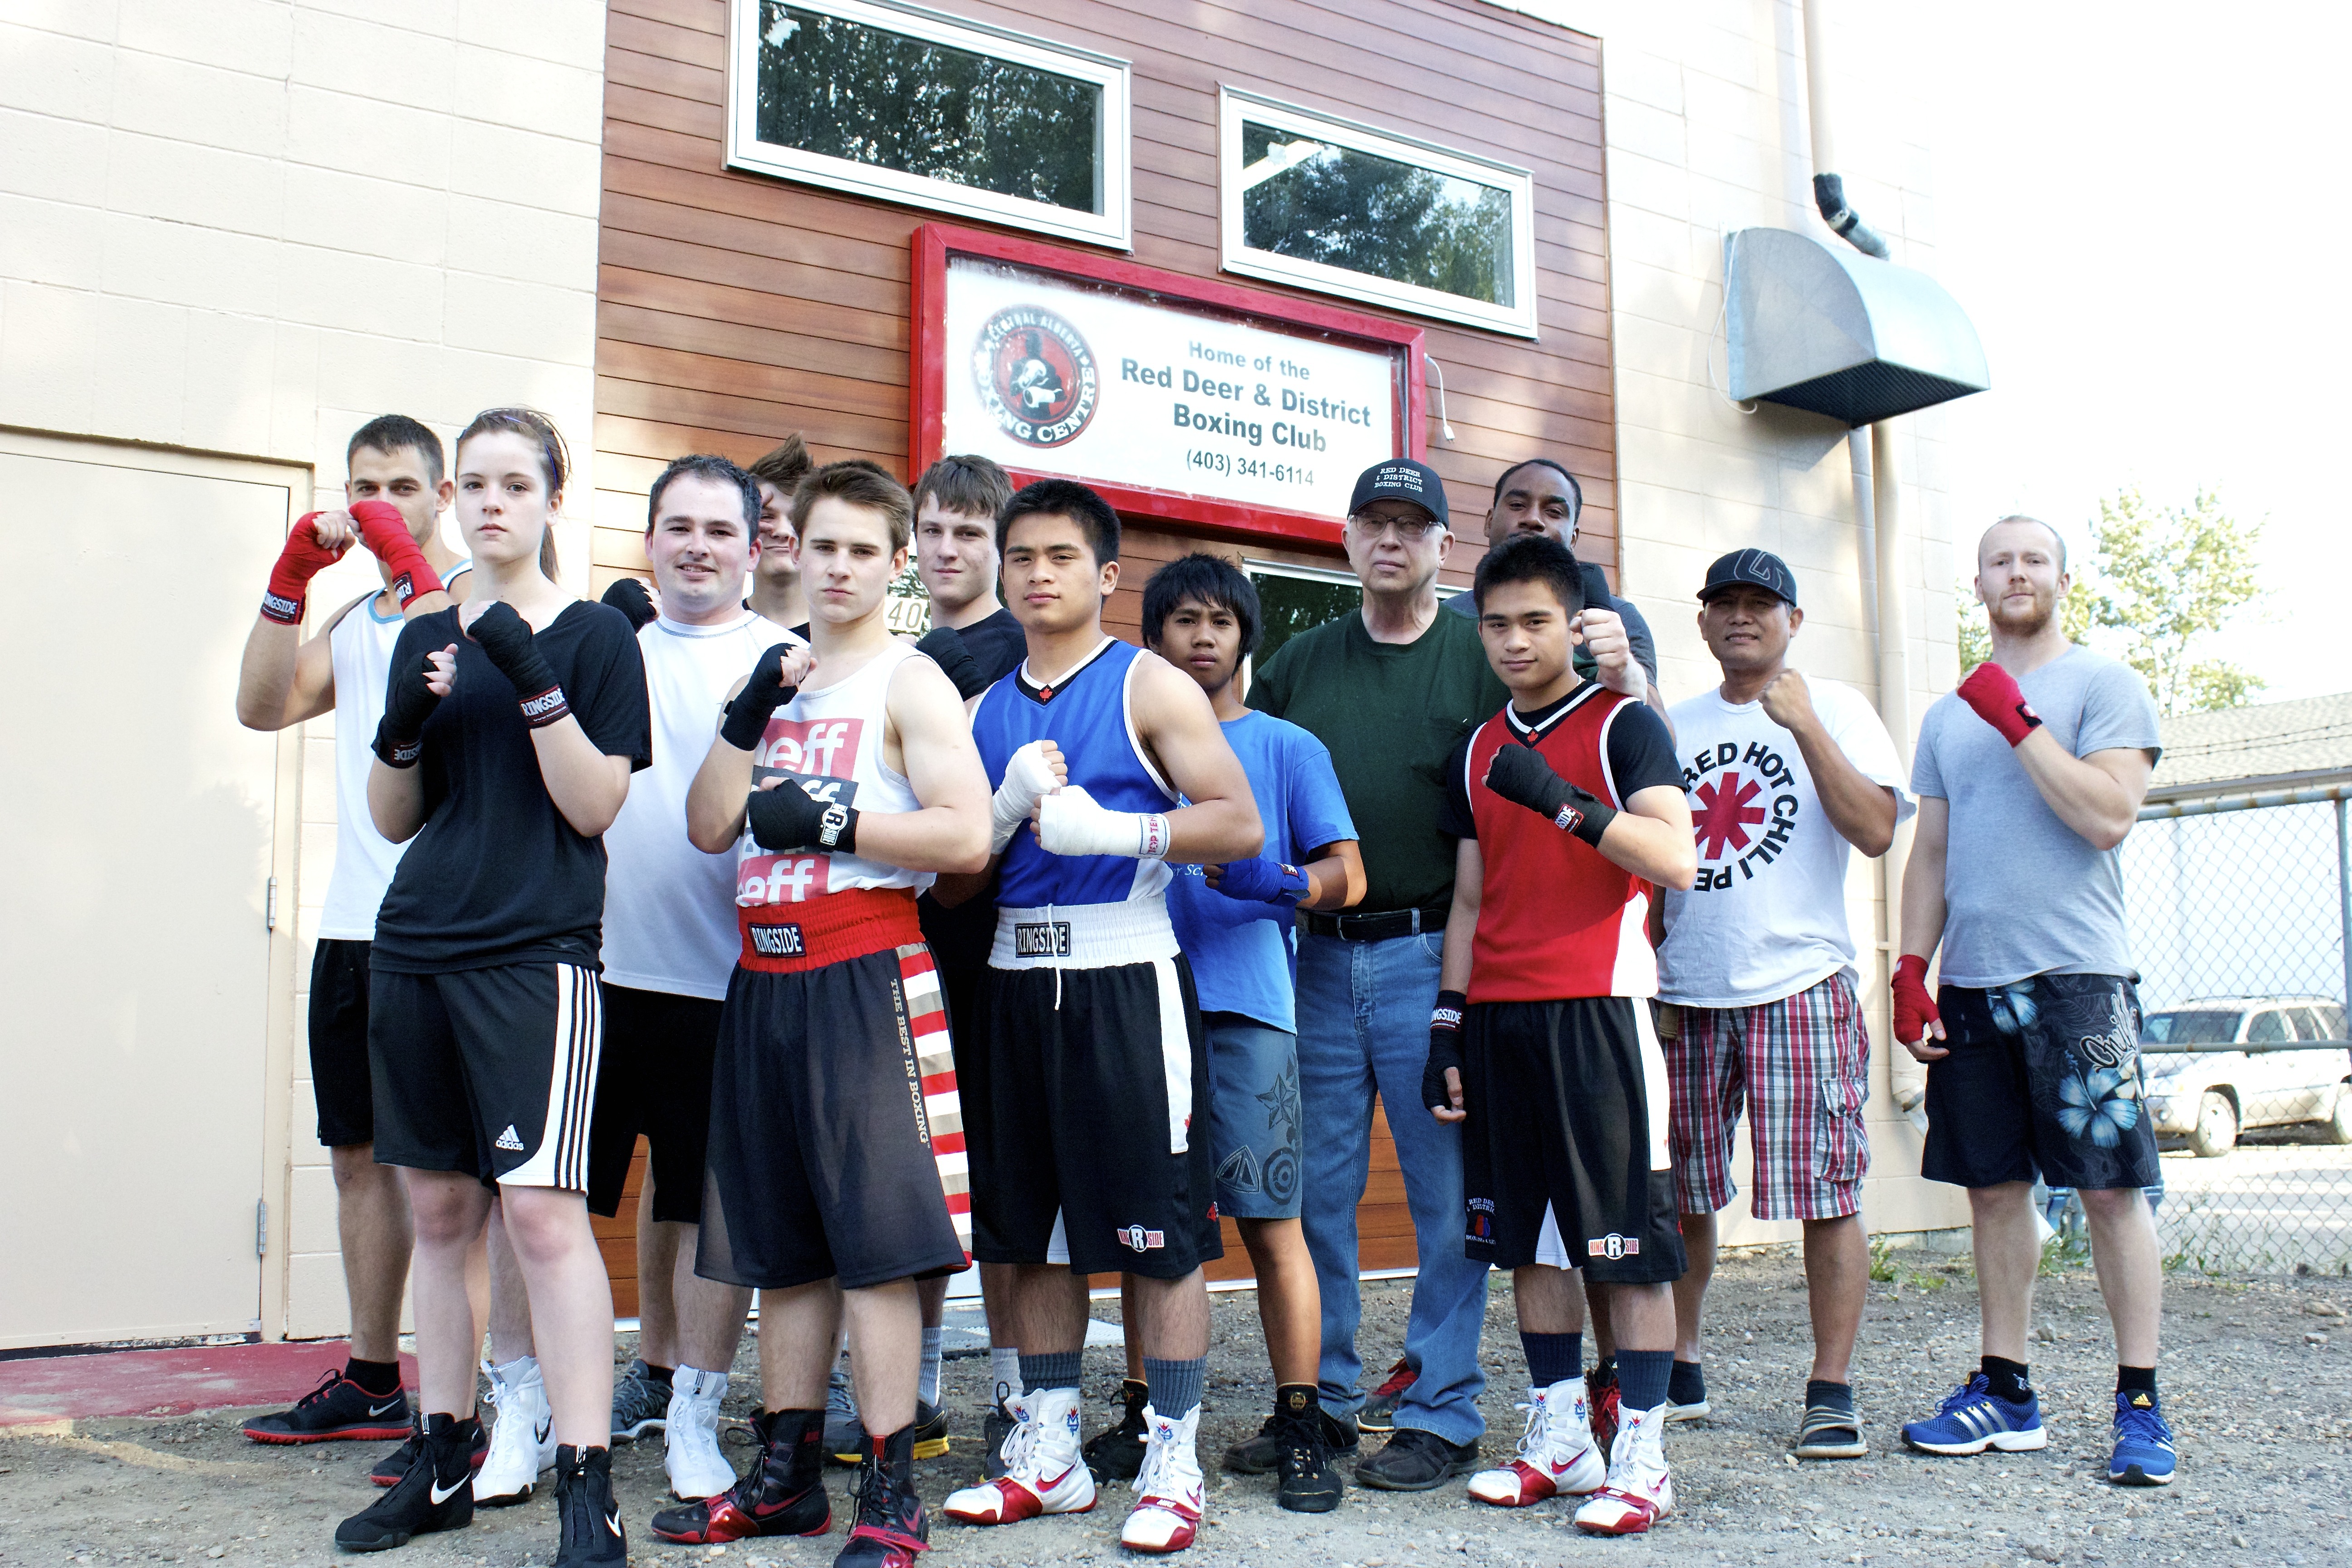 NEW CHAPTER - Members of the Red Deer & District Boxing Club gather in front of the recently-opened facility.